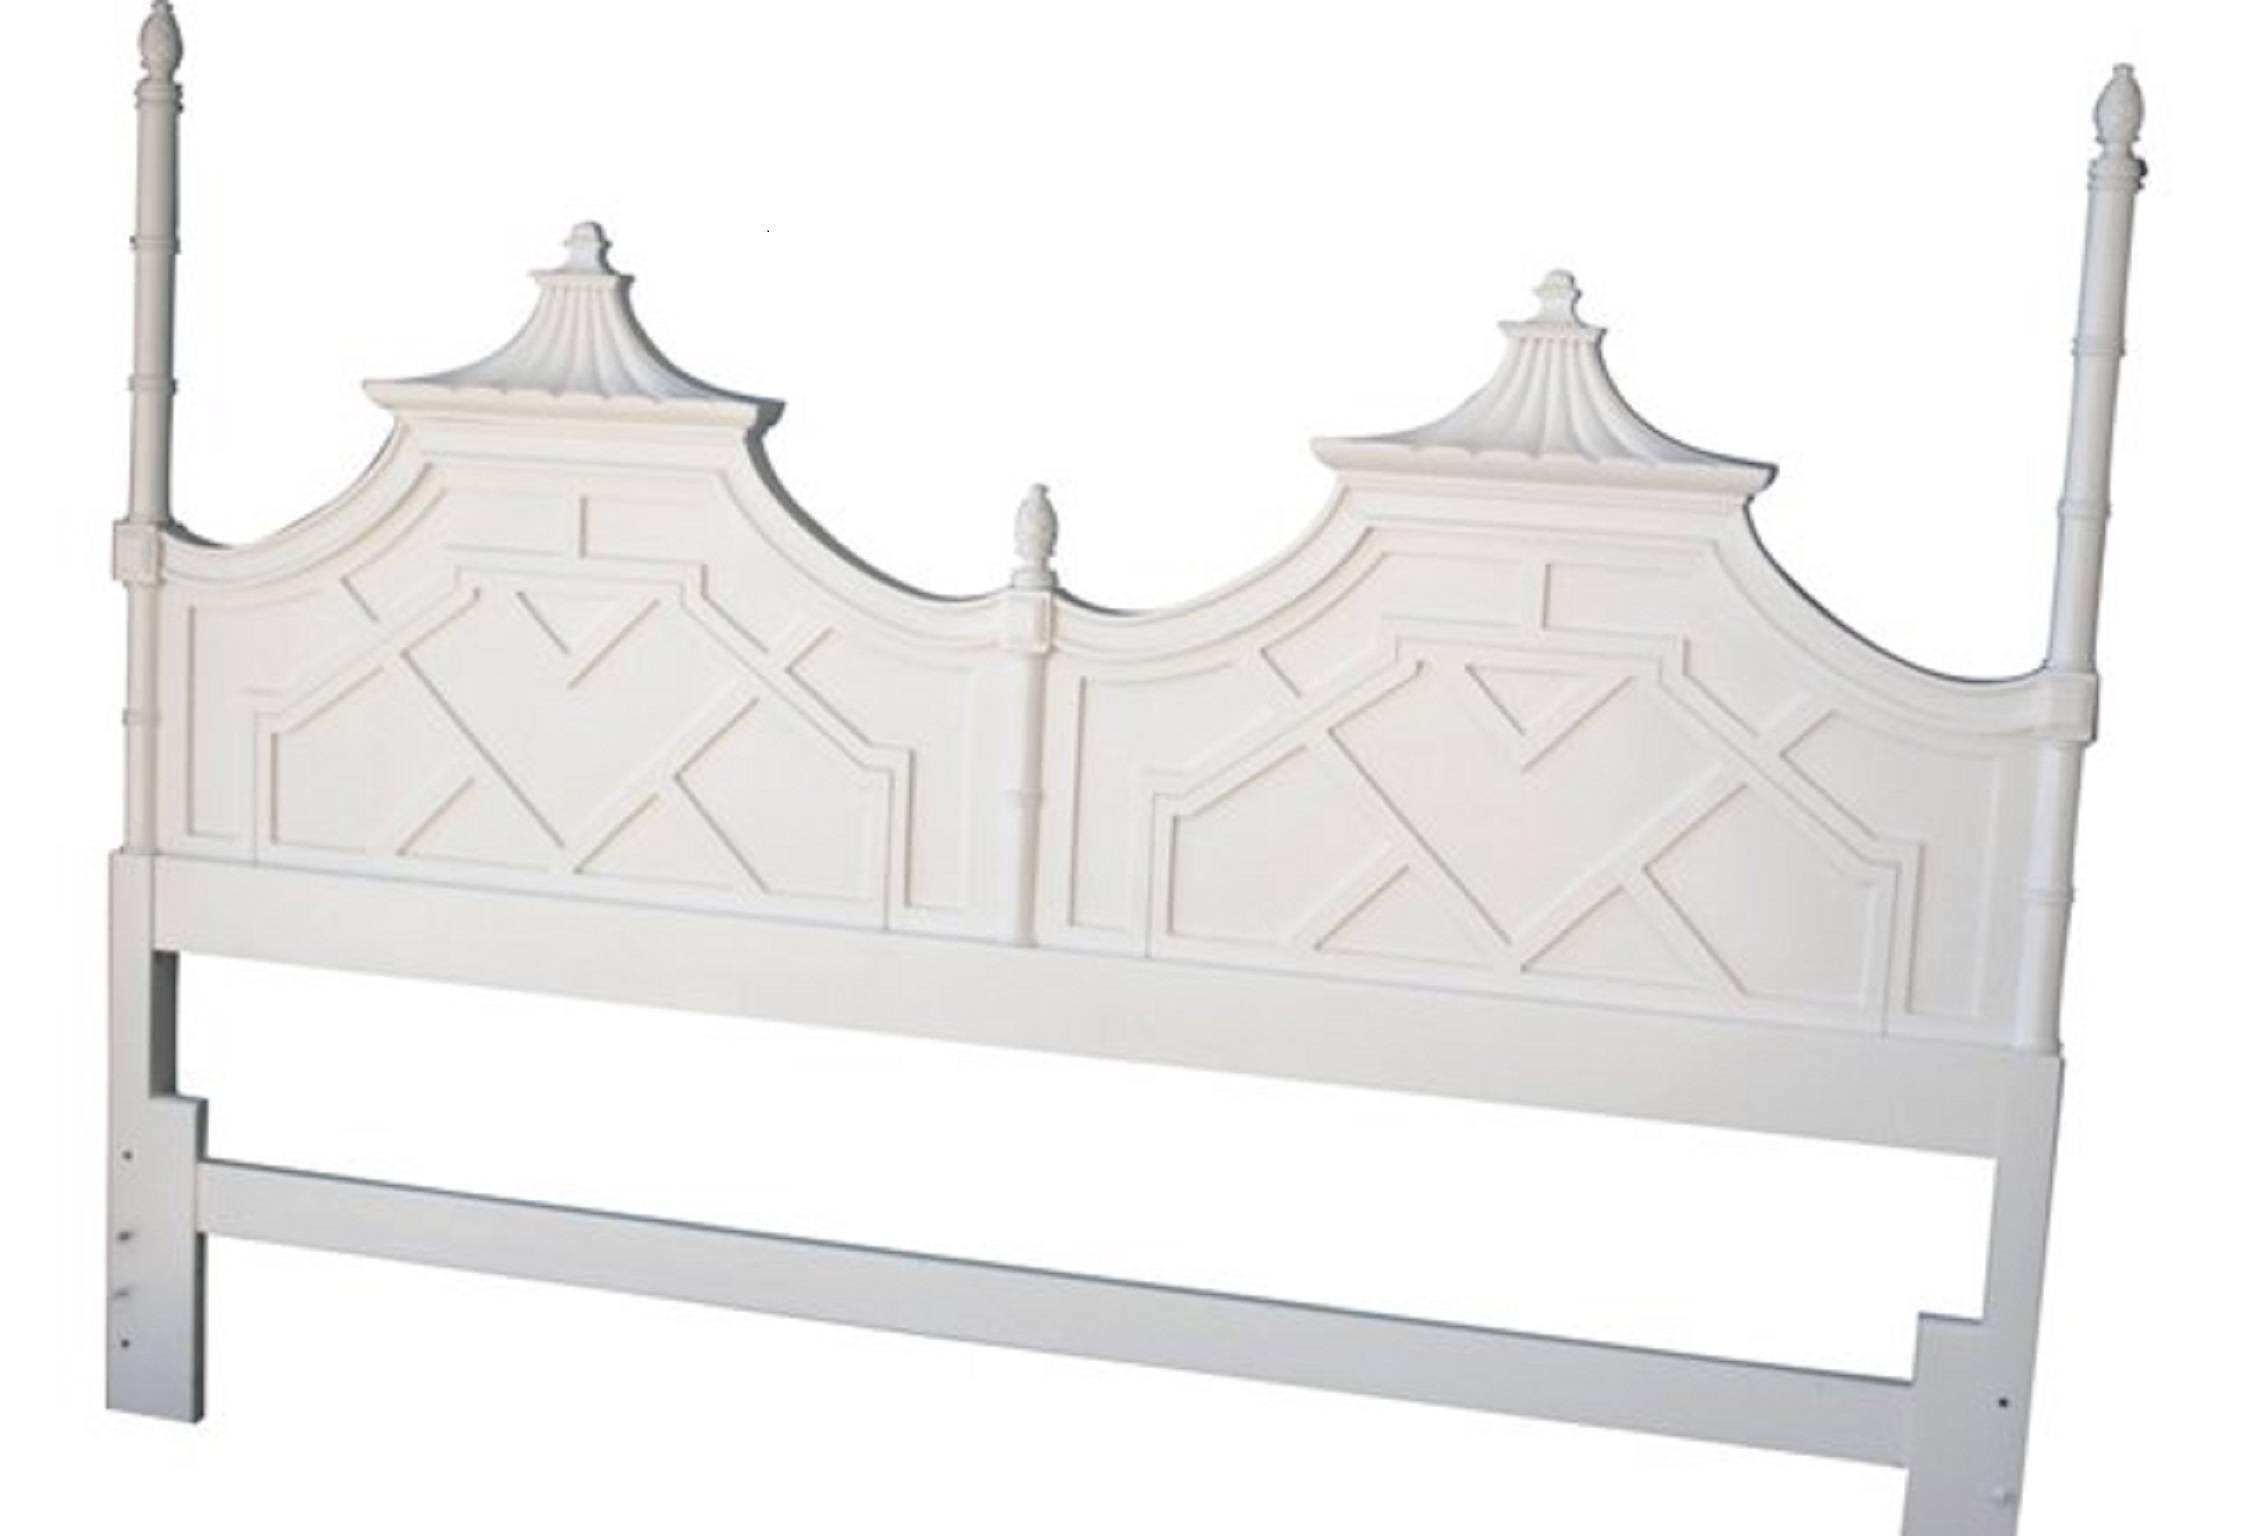 Thomasville king-size pagoda Chinese Chippendale headboard. Newly lacquered in a bright white gloss finish. There may be slight imperfections to the newly lacquered vintage finish. If buyer wants they can choose another colt other than white